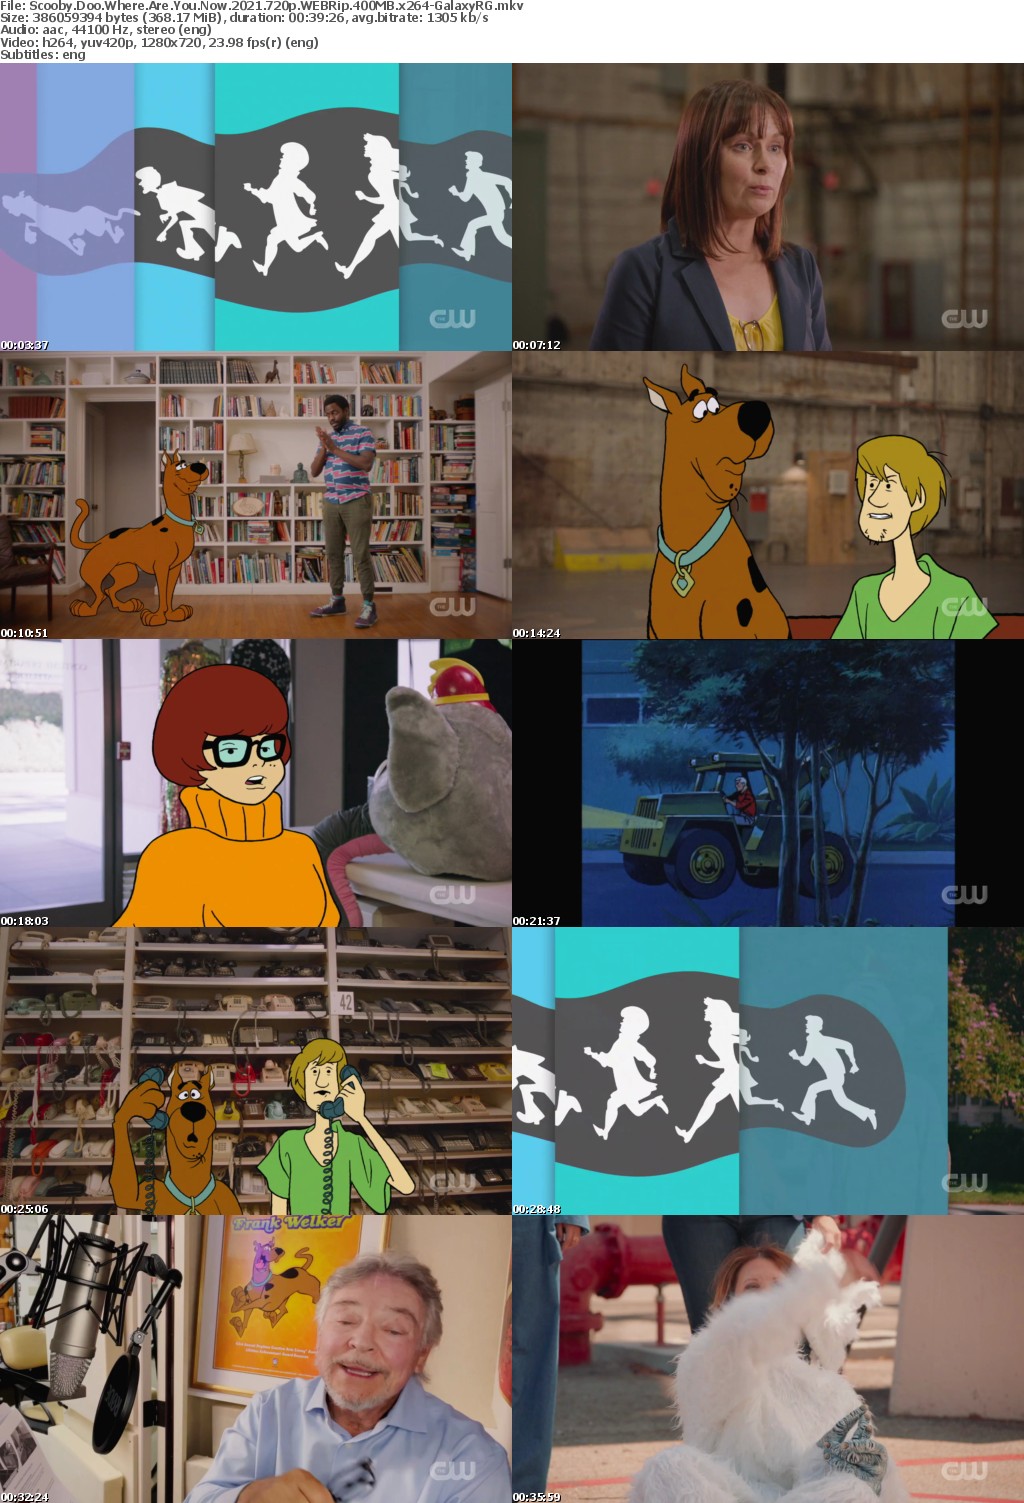 Scooby Doo Where Are You Now 2021 720p WEBRip 400MB x264-GalaxyRG